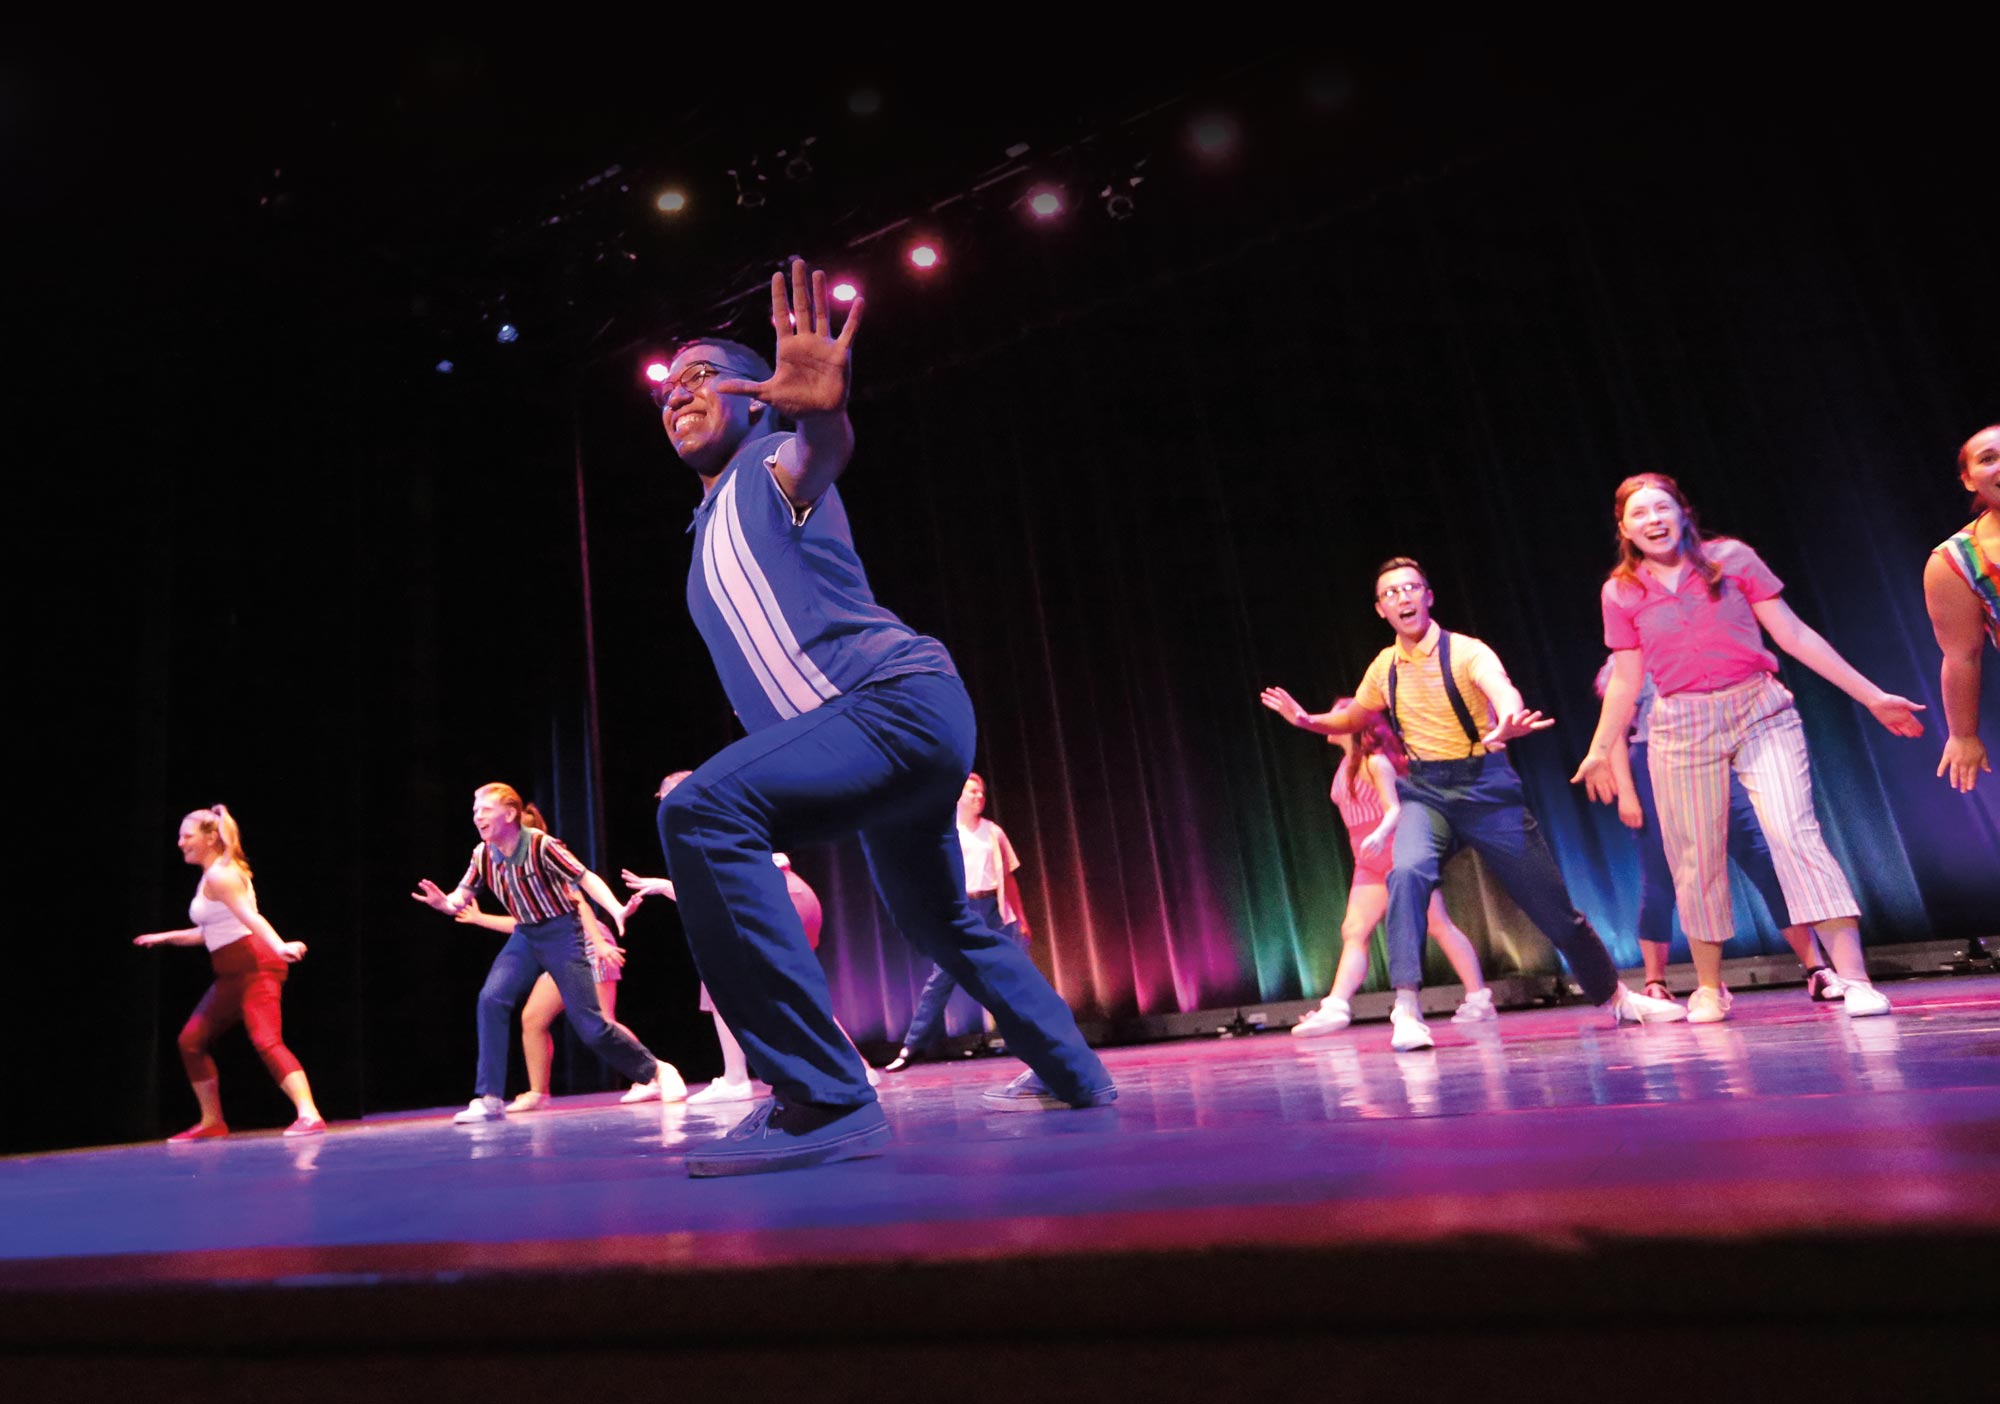 Students from music, theatre and dance program showcased their talents with a performance for the public at the Music Hall in Portsmouth